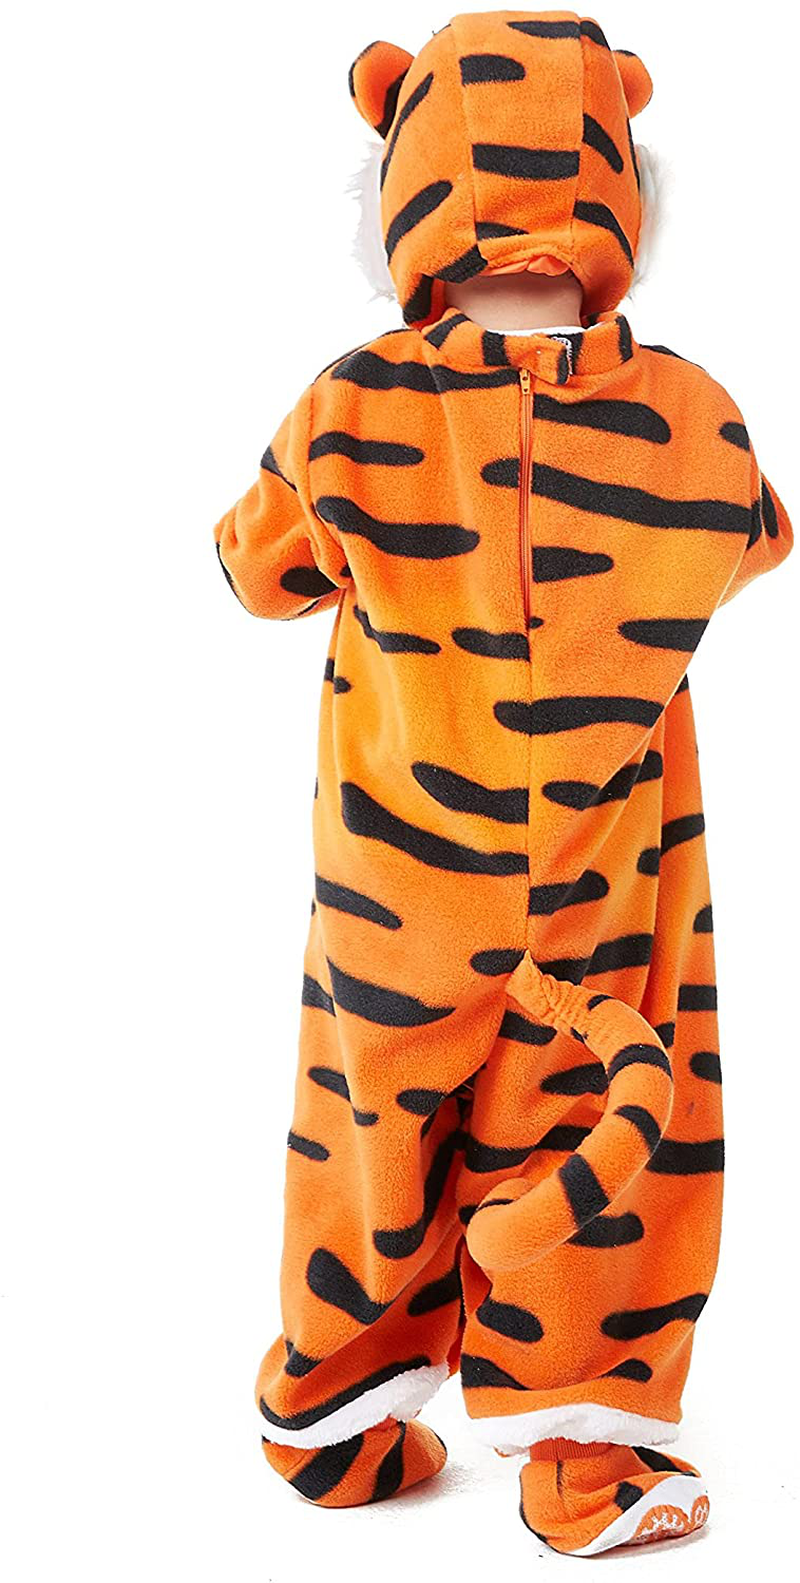 Spooktacular Creations Deluxe Baby Tiger Costume Set (18-24 Months)